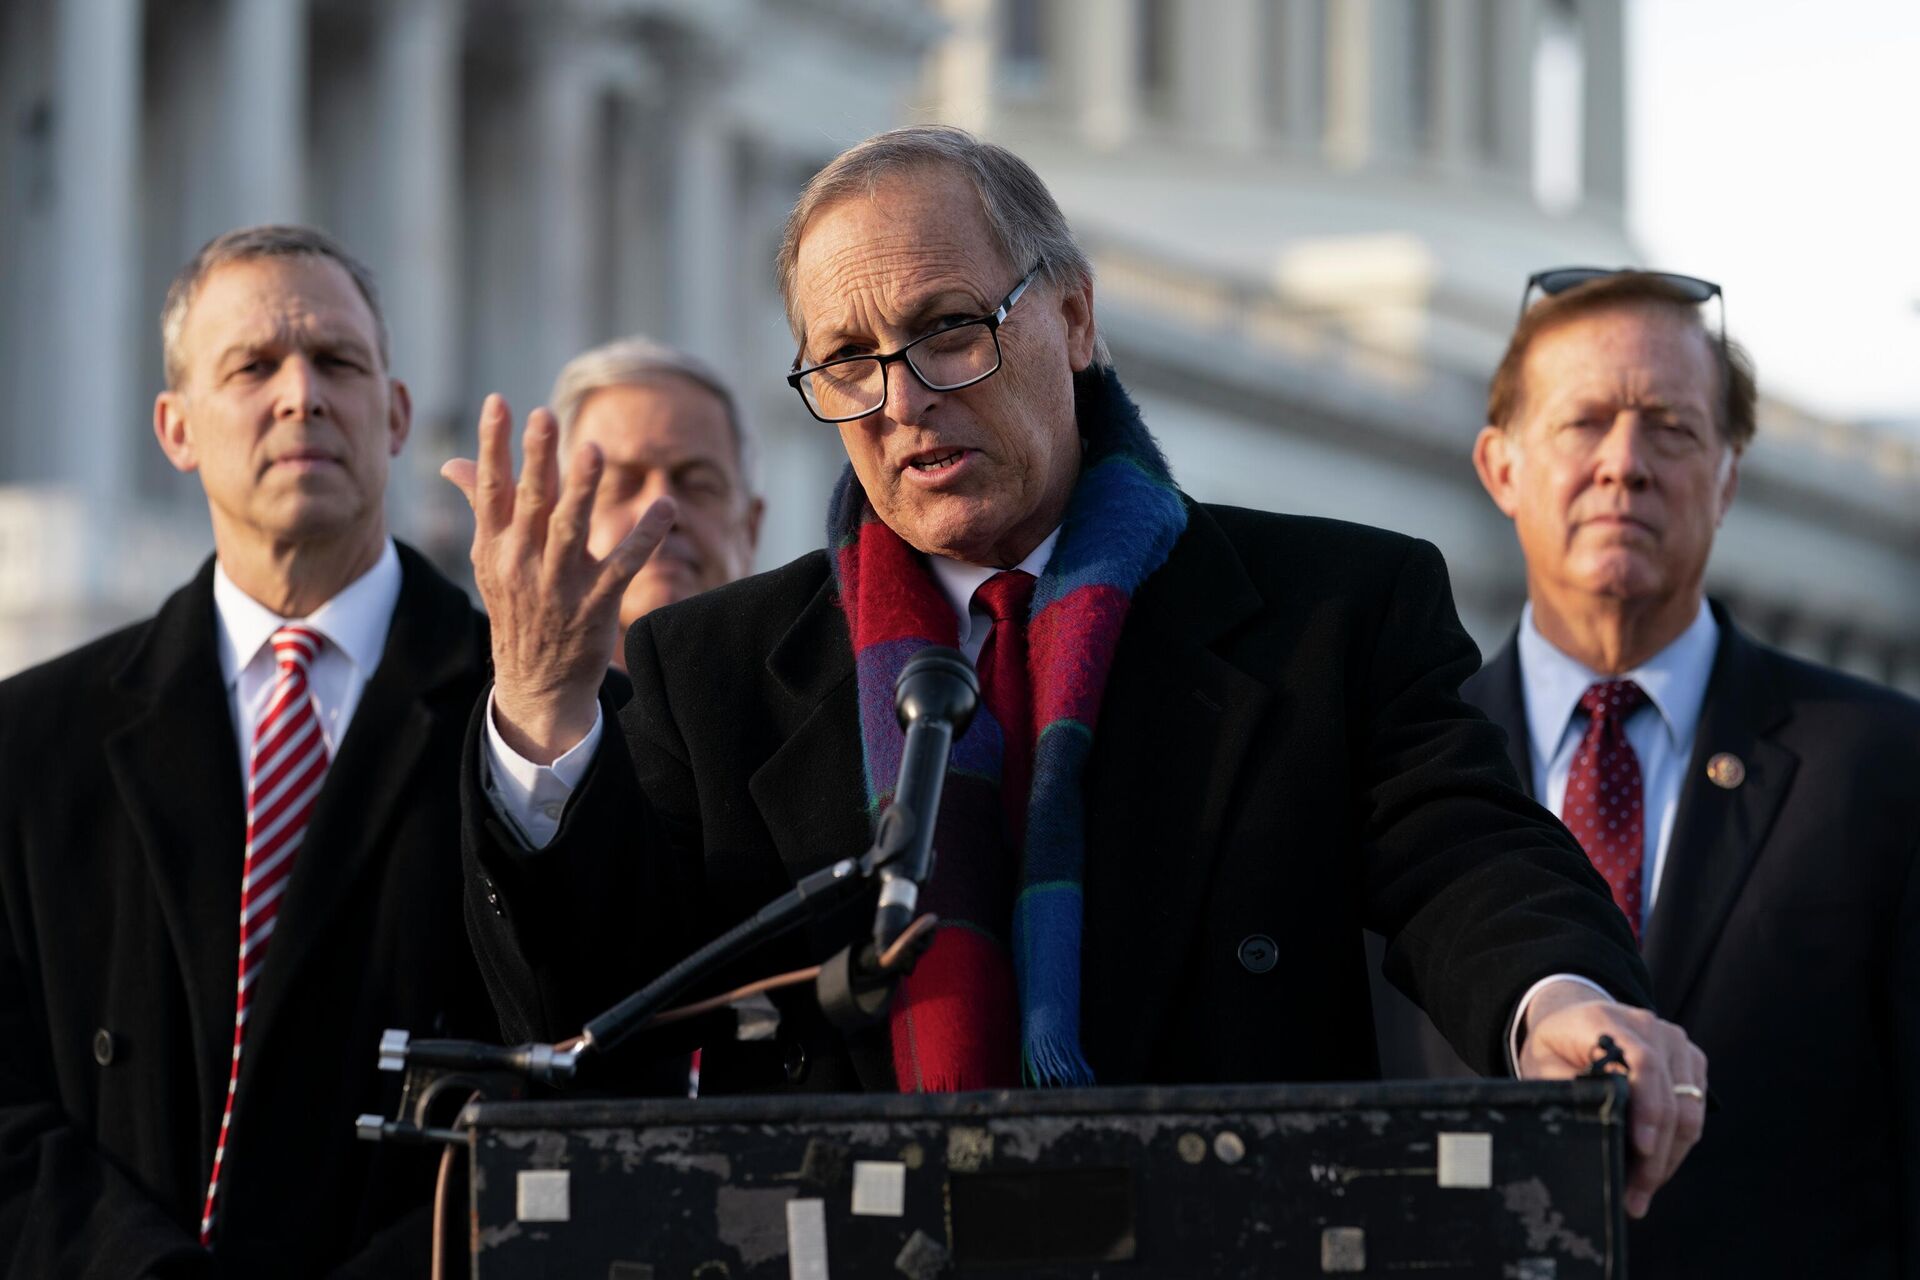 Freedom Caucus chairman Rep. Andy Biggs, R-Ariz., center, speaks next to Rep. Scott Perry, R-Pa., left, and Randy Weber, R-Texas, right, on Capitol Hill, Thursday, Dec. 3, 2020, in Washington. - Sputnik International, 1920, 12.05.2022